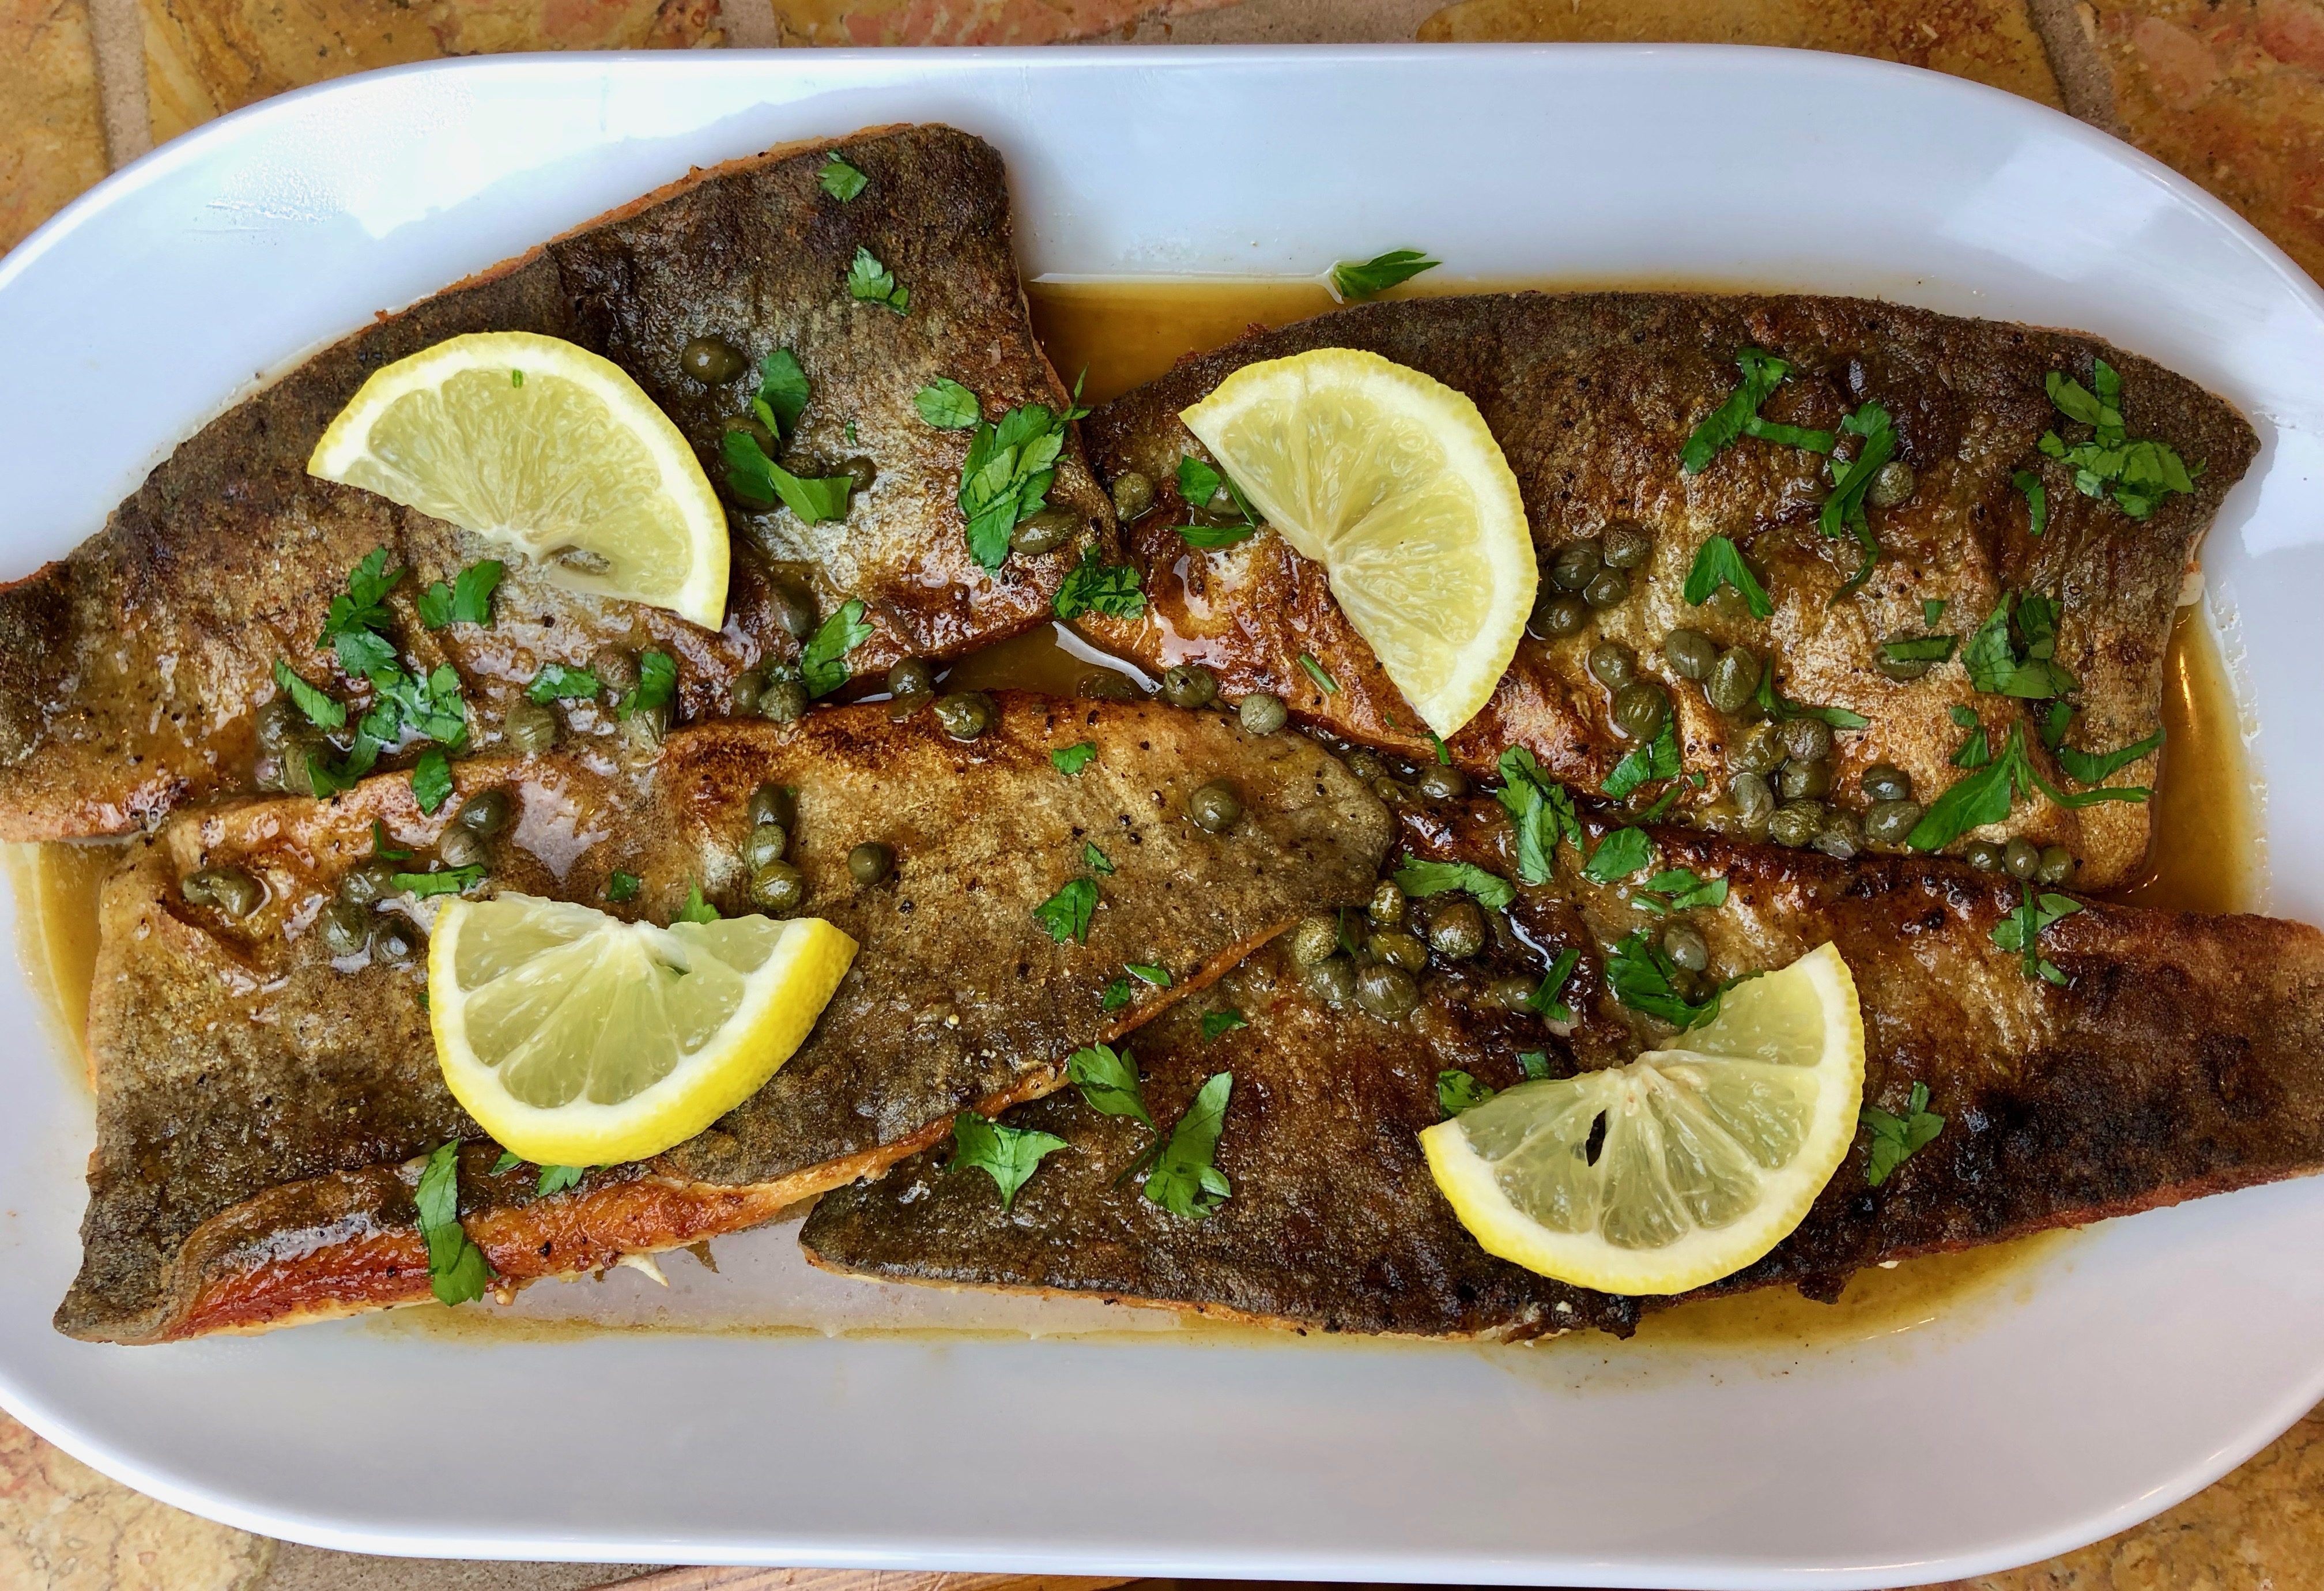 Crispy Trout with Lemon and Capers – Gluten Free